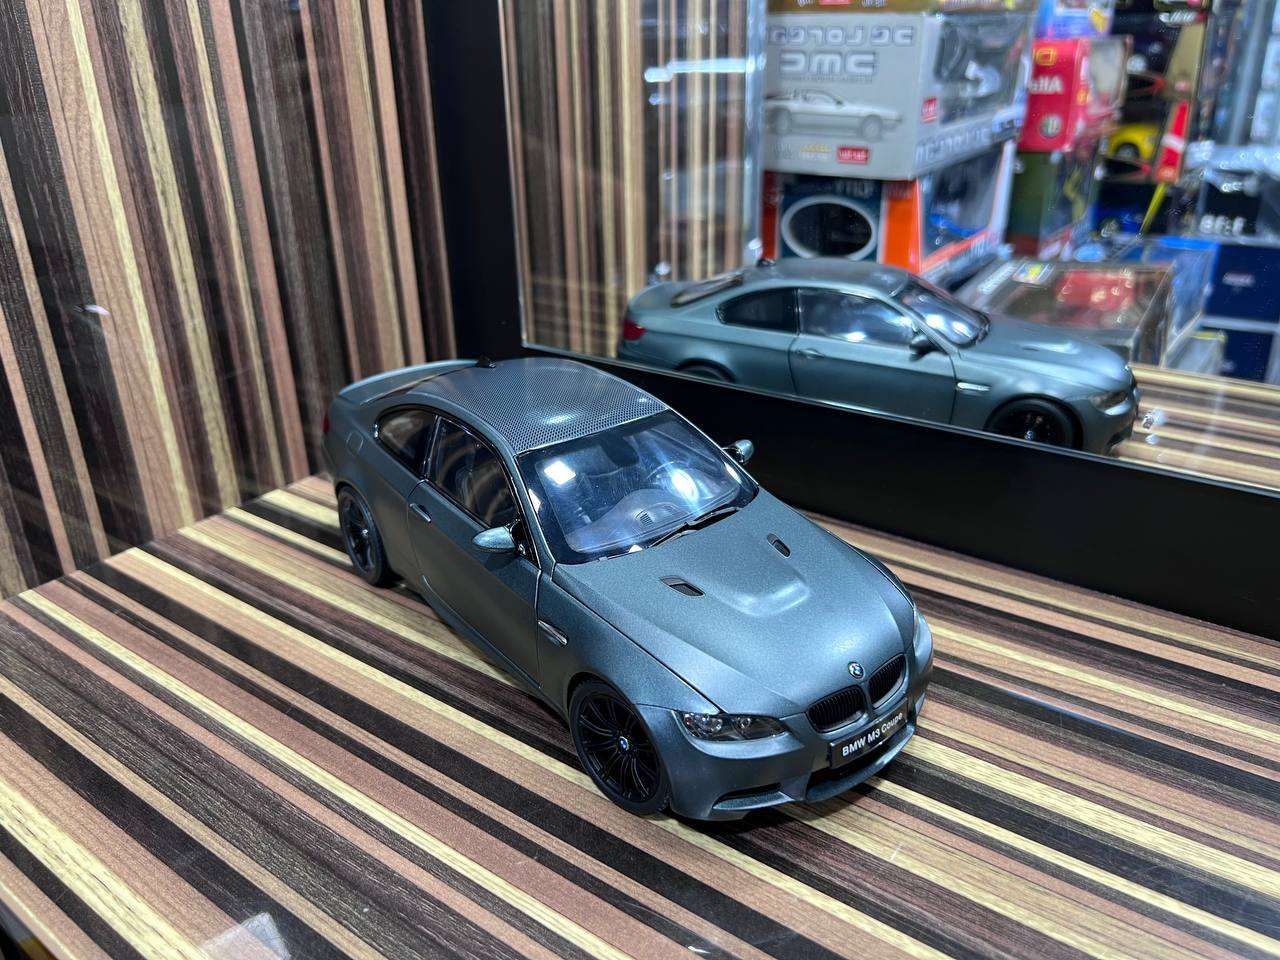 1/18 Diecast BMW M3 Coupe Kyosho Scale Model Car